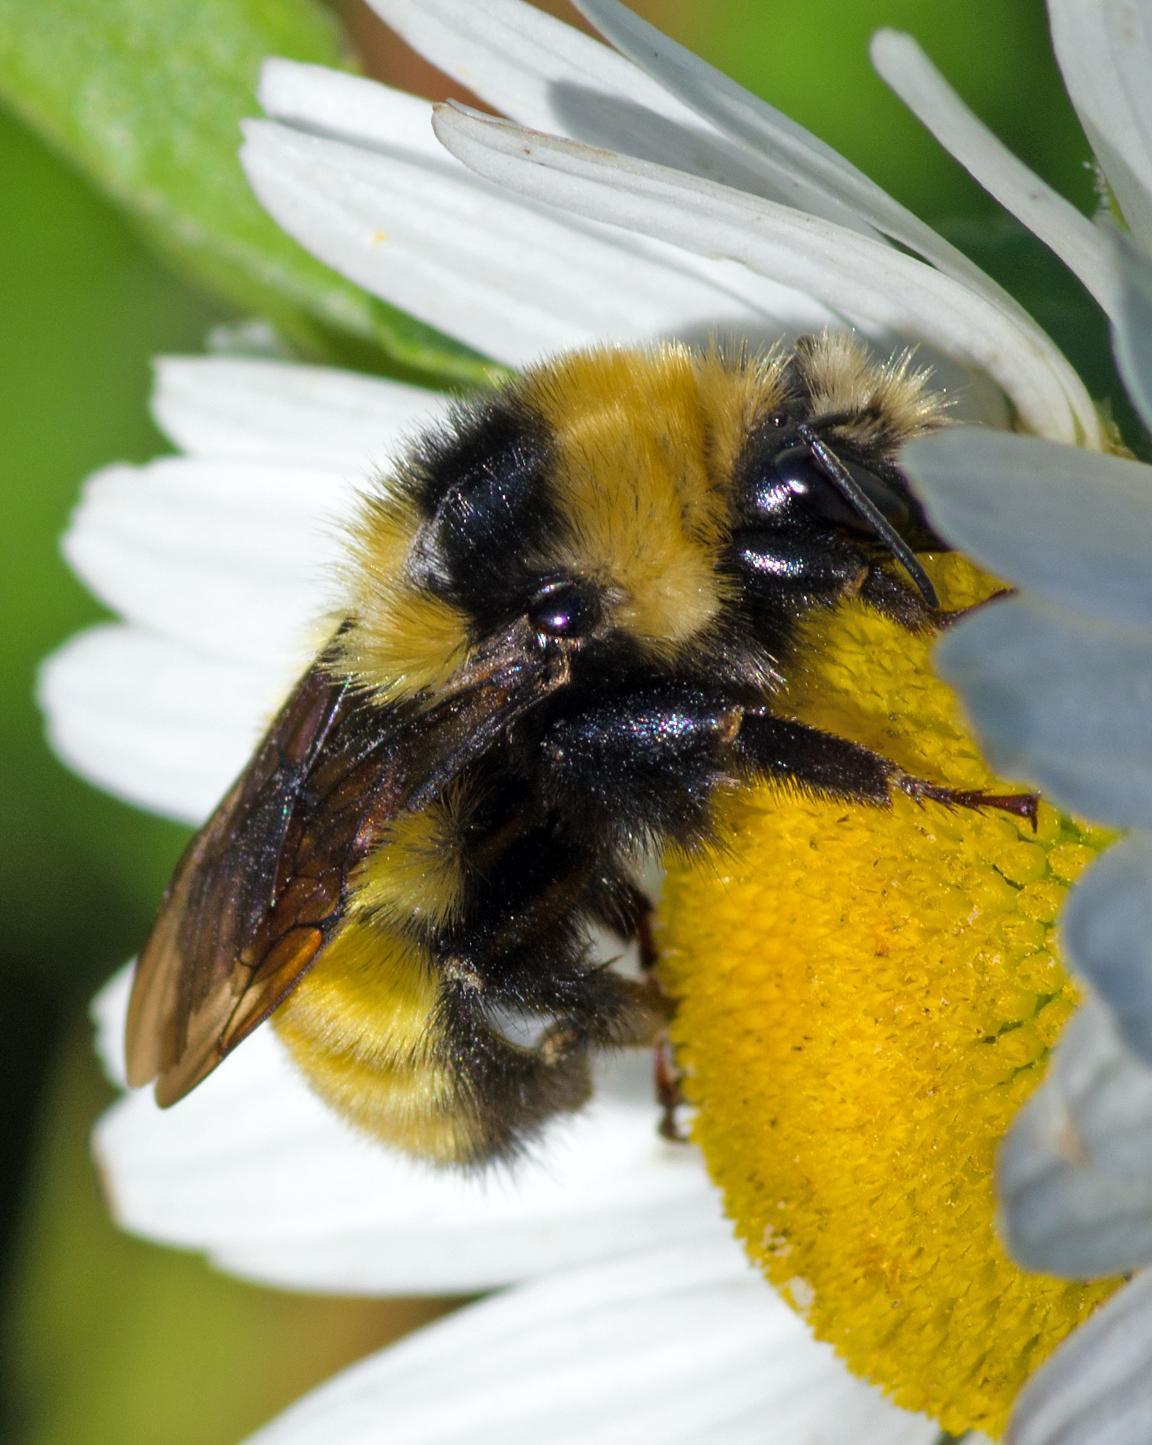 American bumble bee Photo by Rob Dickerson